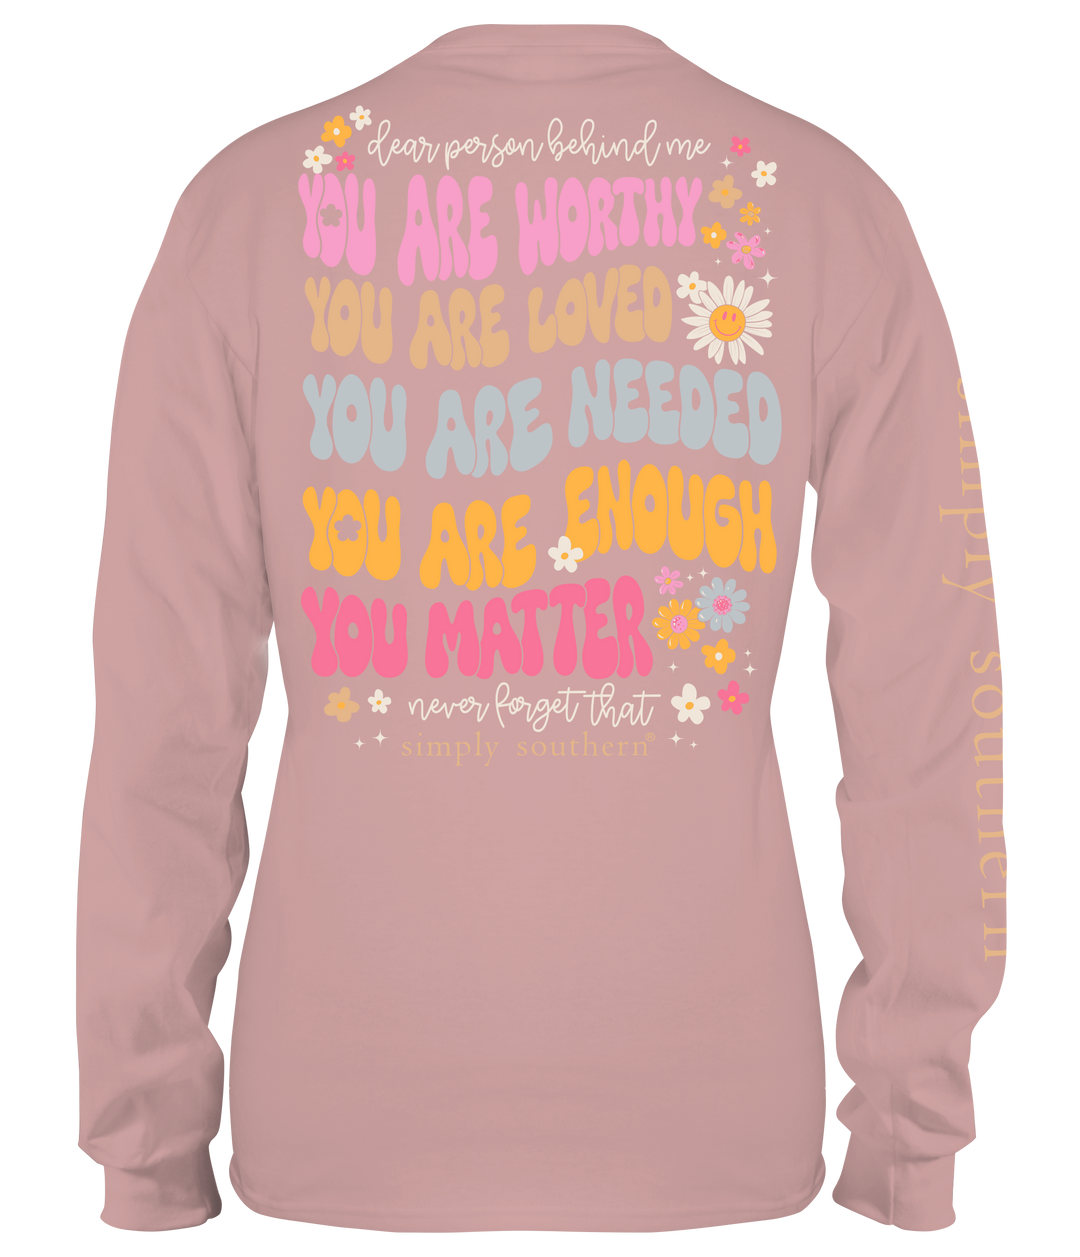 You are Worthy Long Sleeve T-Shirt